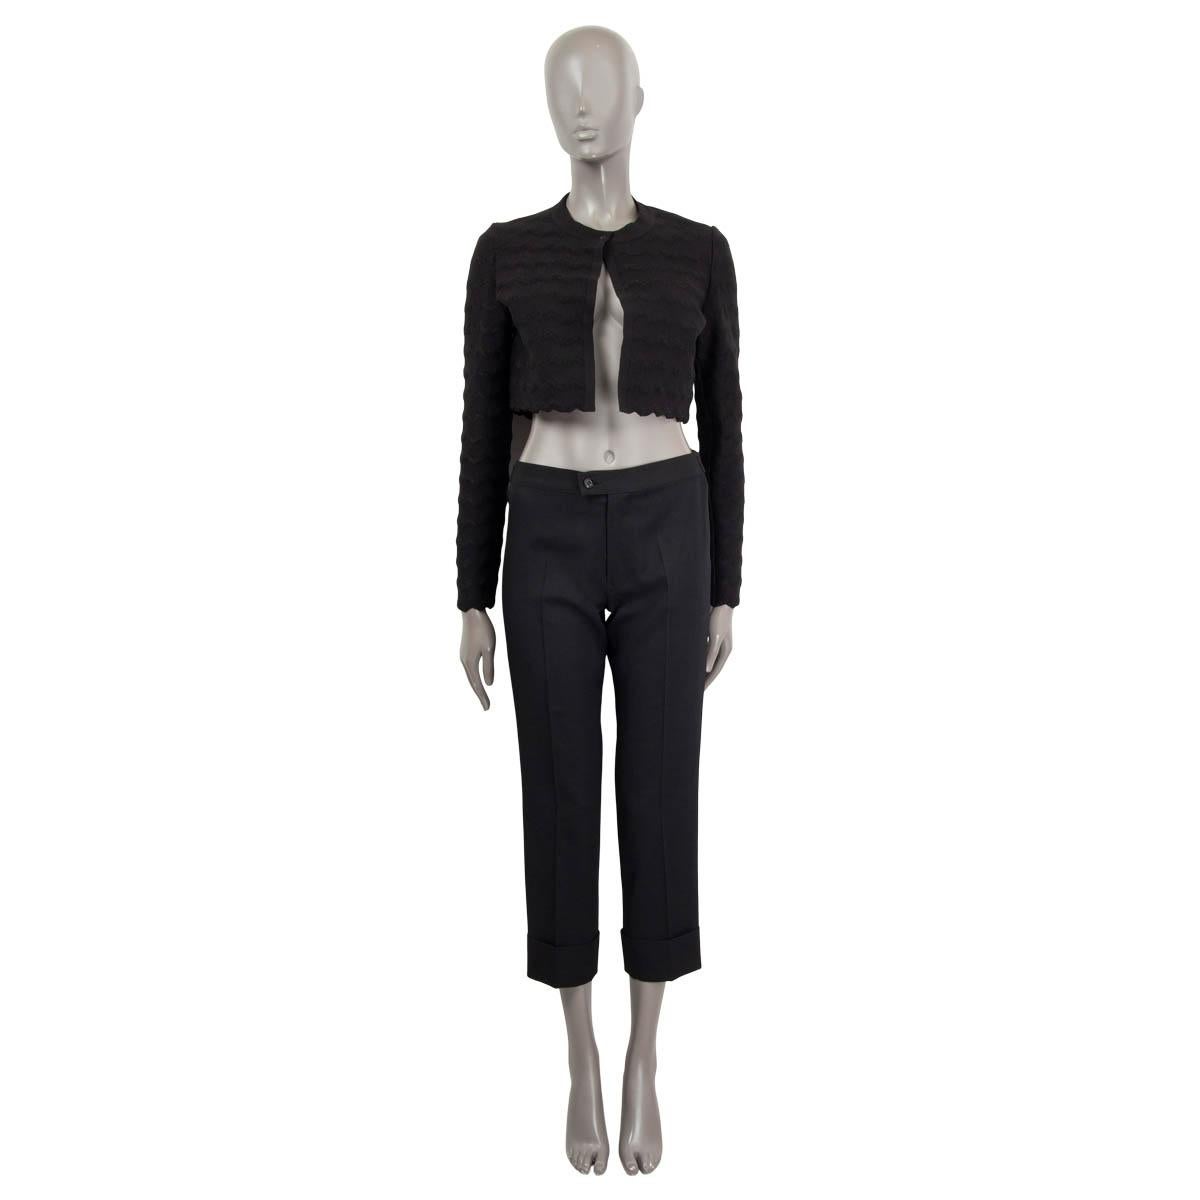 100% authentic Alaïa cropped bolero cardigan in black nylon (47%), wool (44%) and polyester (7%) with long sleeve. Features a zigzag hem at the cuffs and hemline. Opens with one push buttons on the front. Has been worn and is in excellent